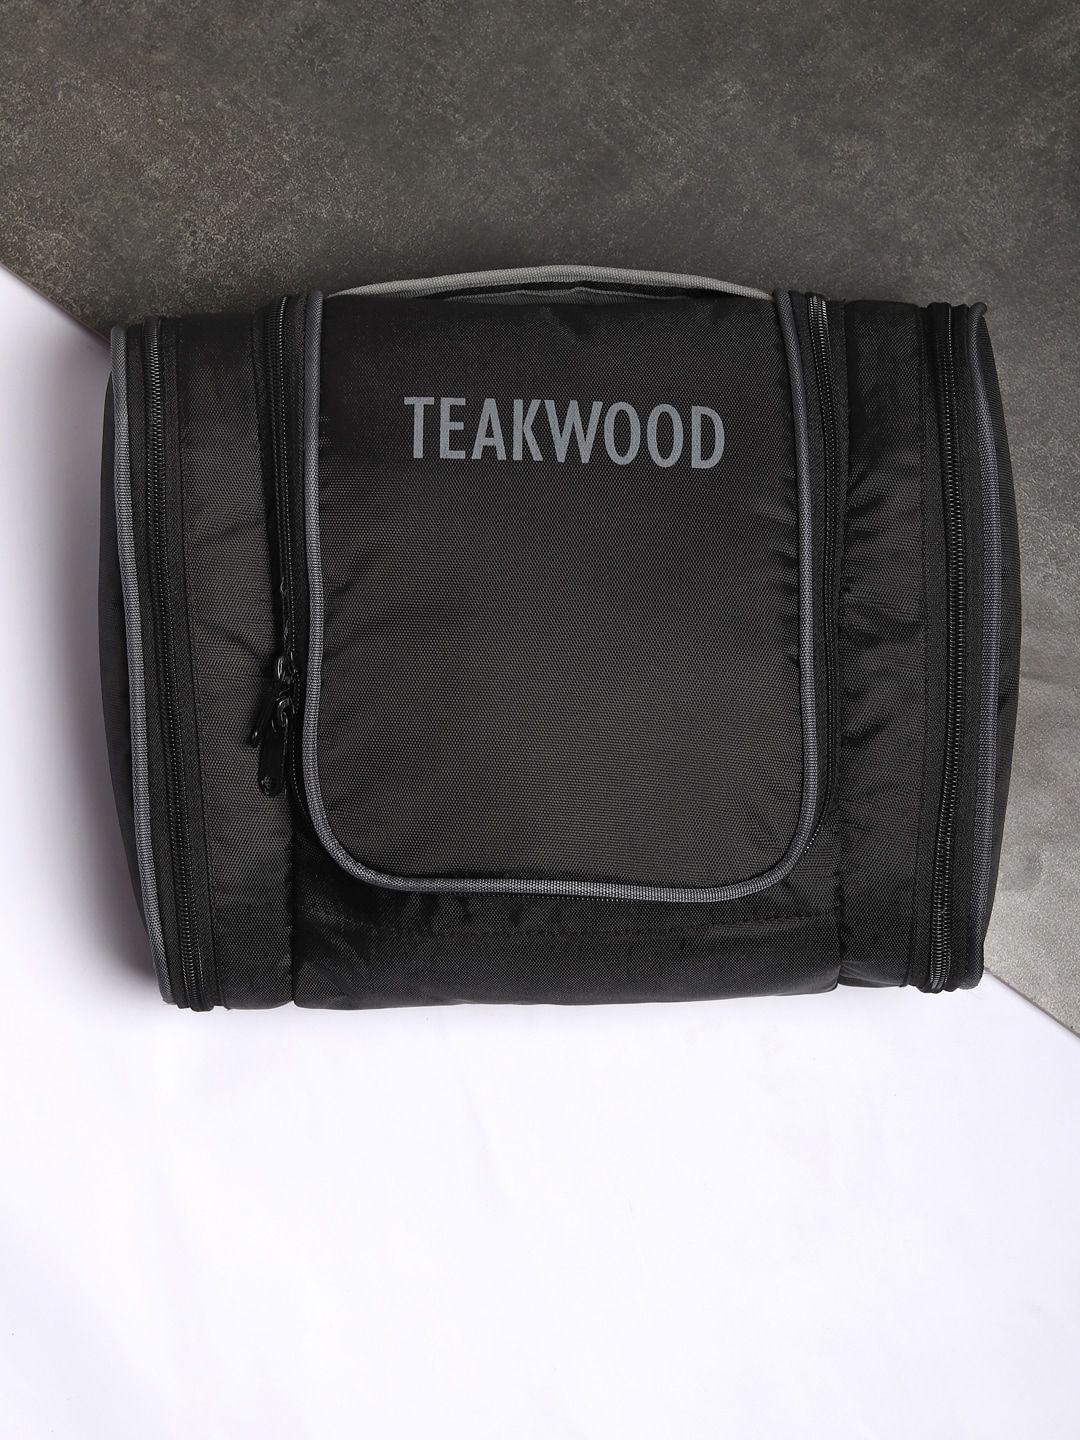 teakwood leathers black brand name printed toiletry pouch